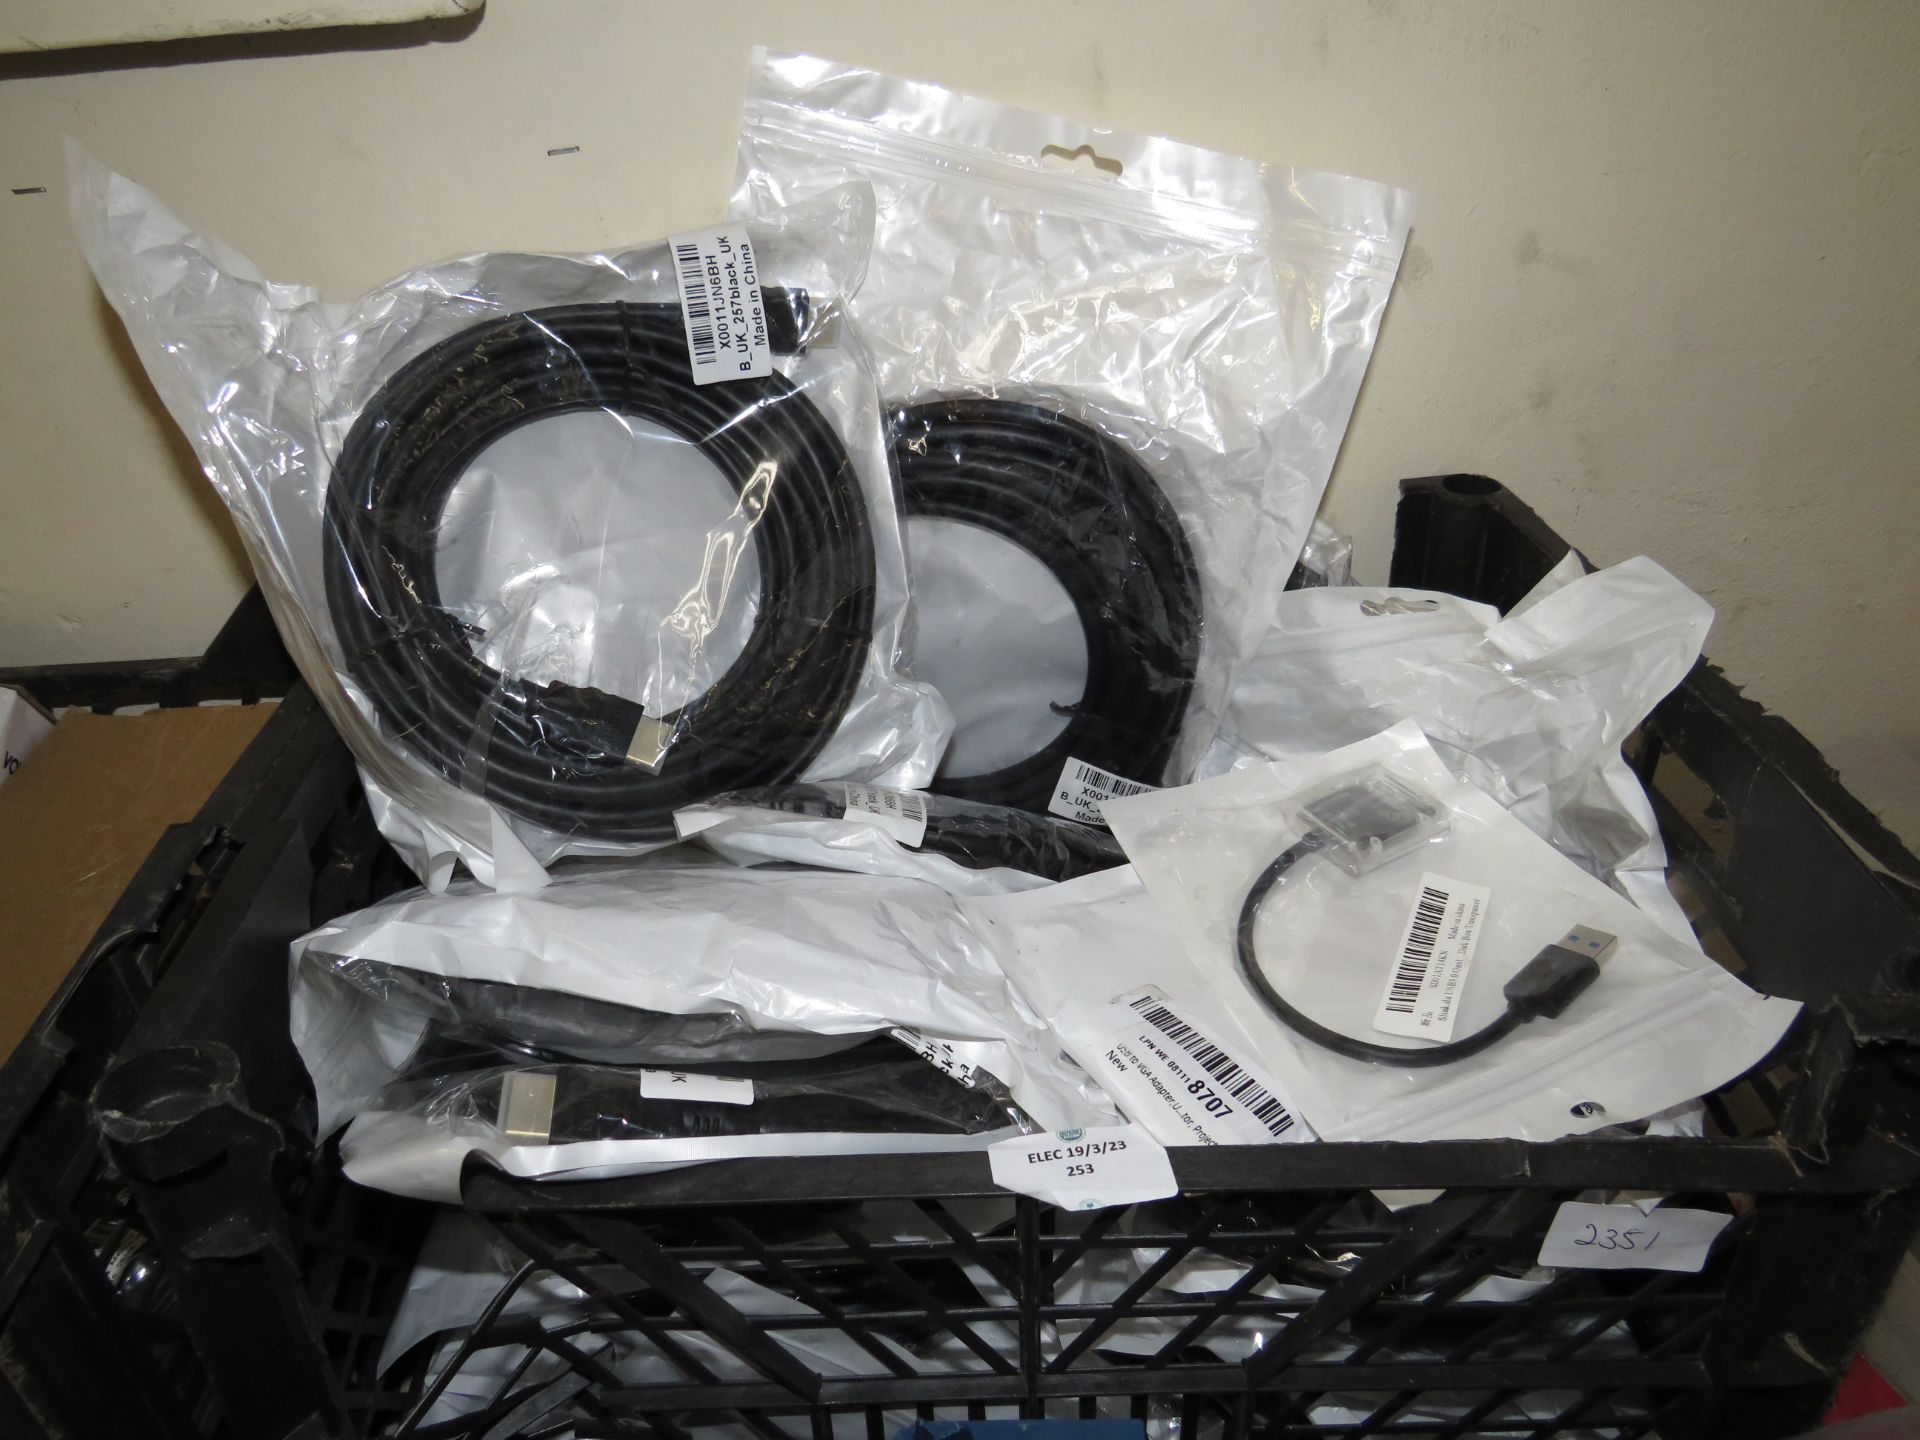 approx 25+ various USB Cables, in packaging see image